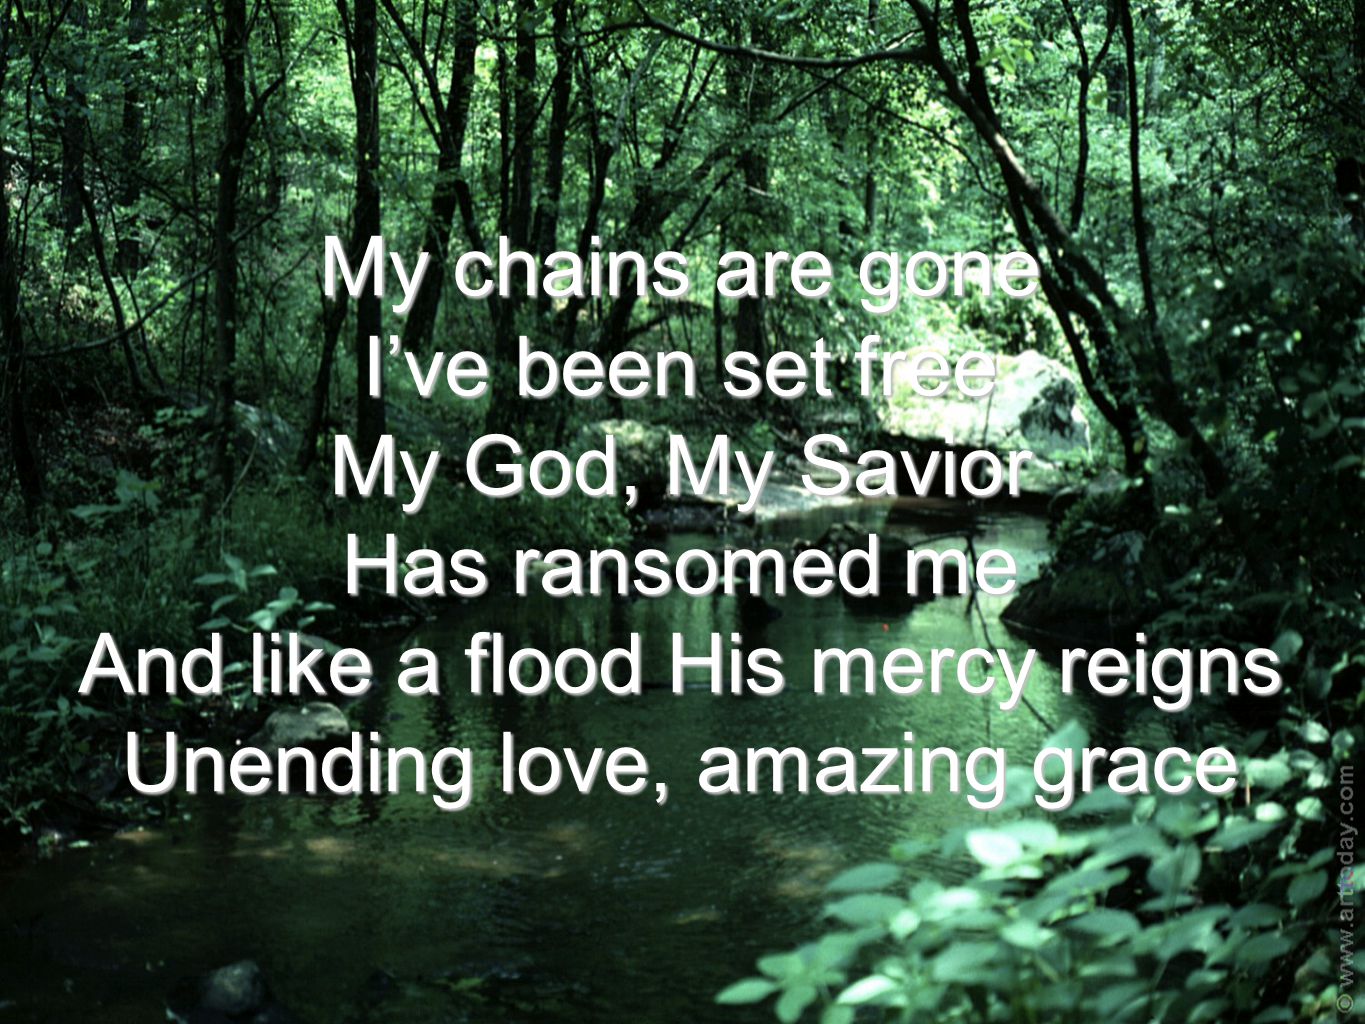 My chains are gone I’ve been set free My God, My Savior Has ransomed me And like a flood His mercy reigns Unending love, amazing grace